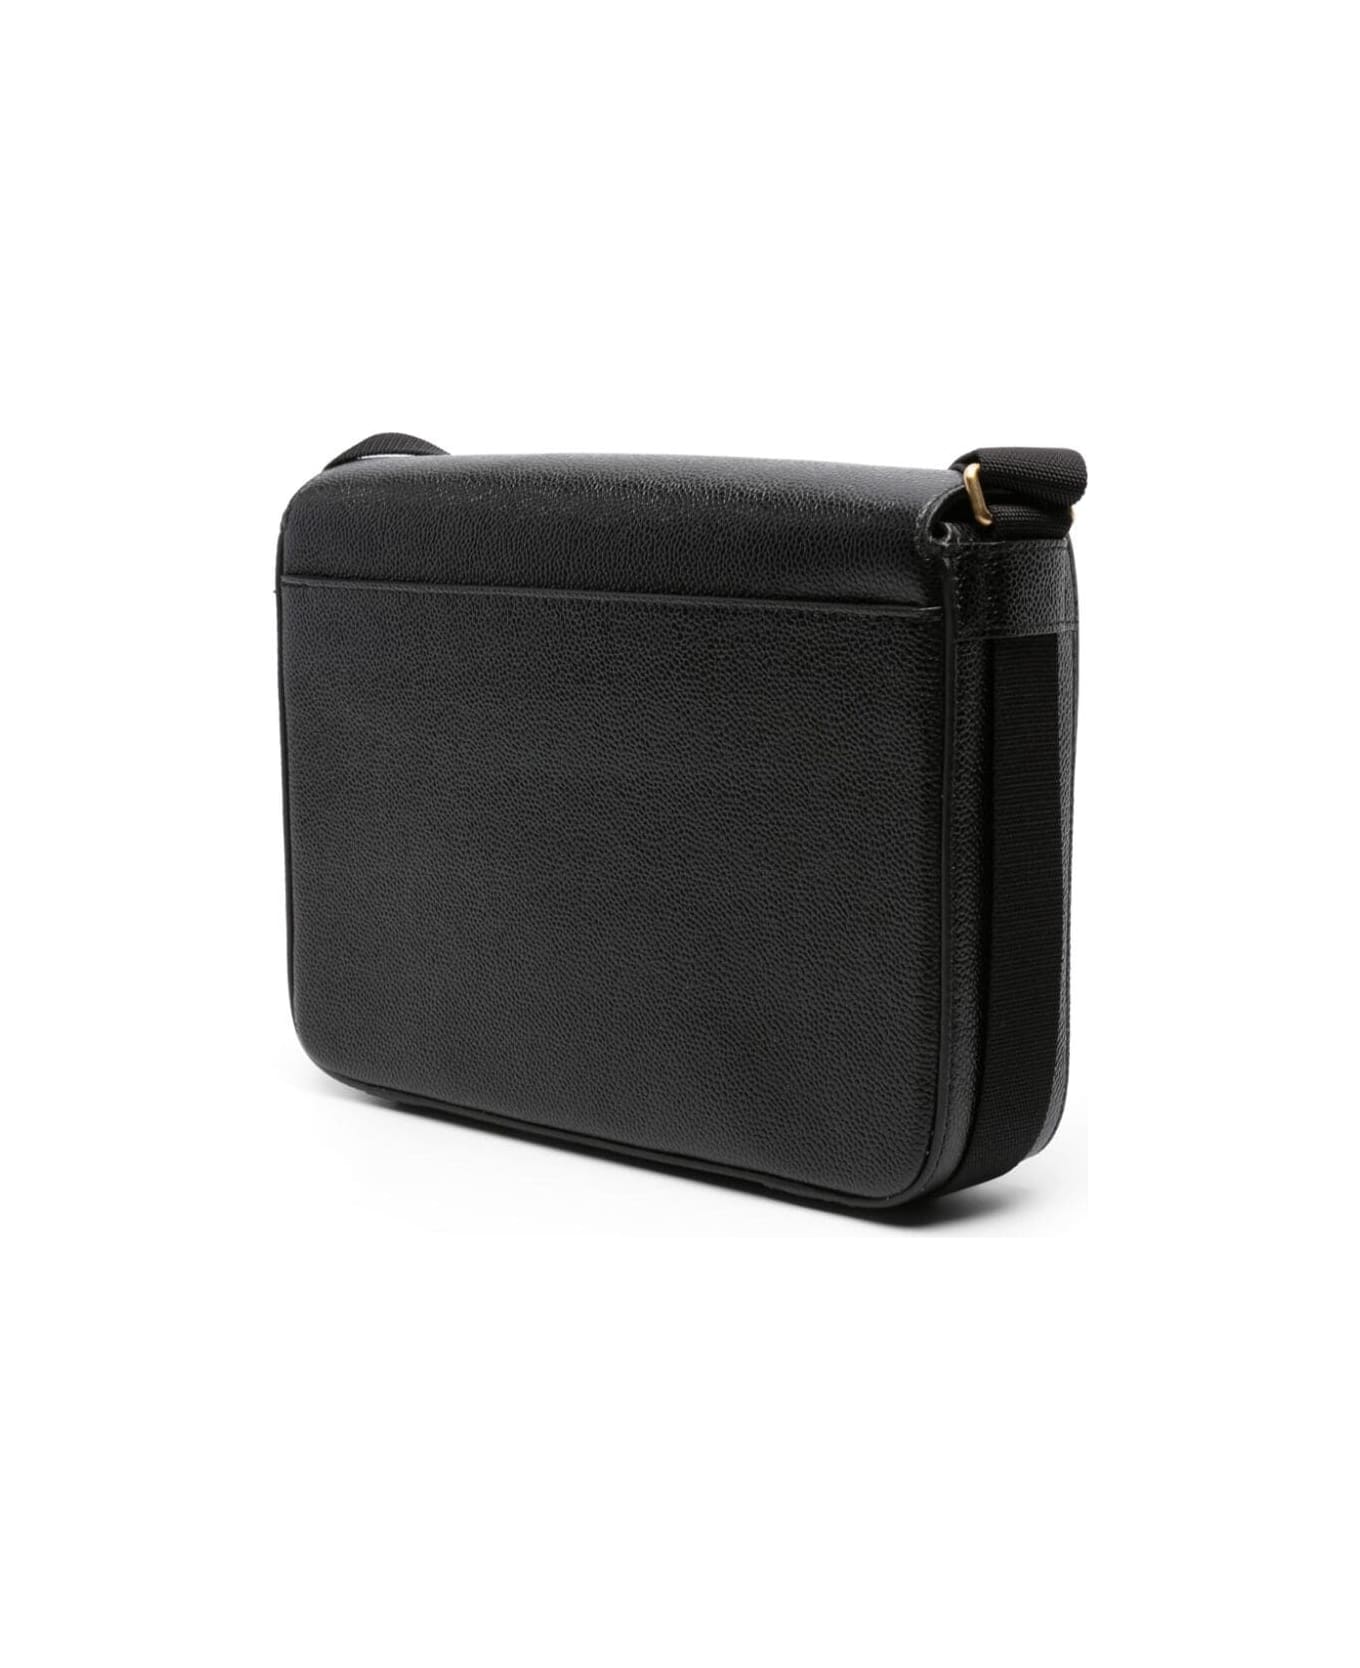 Thom Browne Reporter Bag With Webbing Strap In Pebble Grain Leather - Black ショルダーバッグ